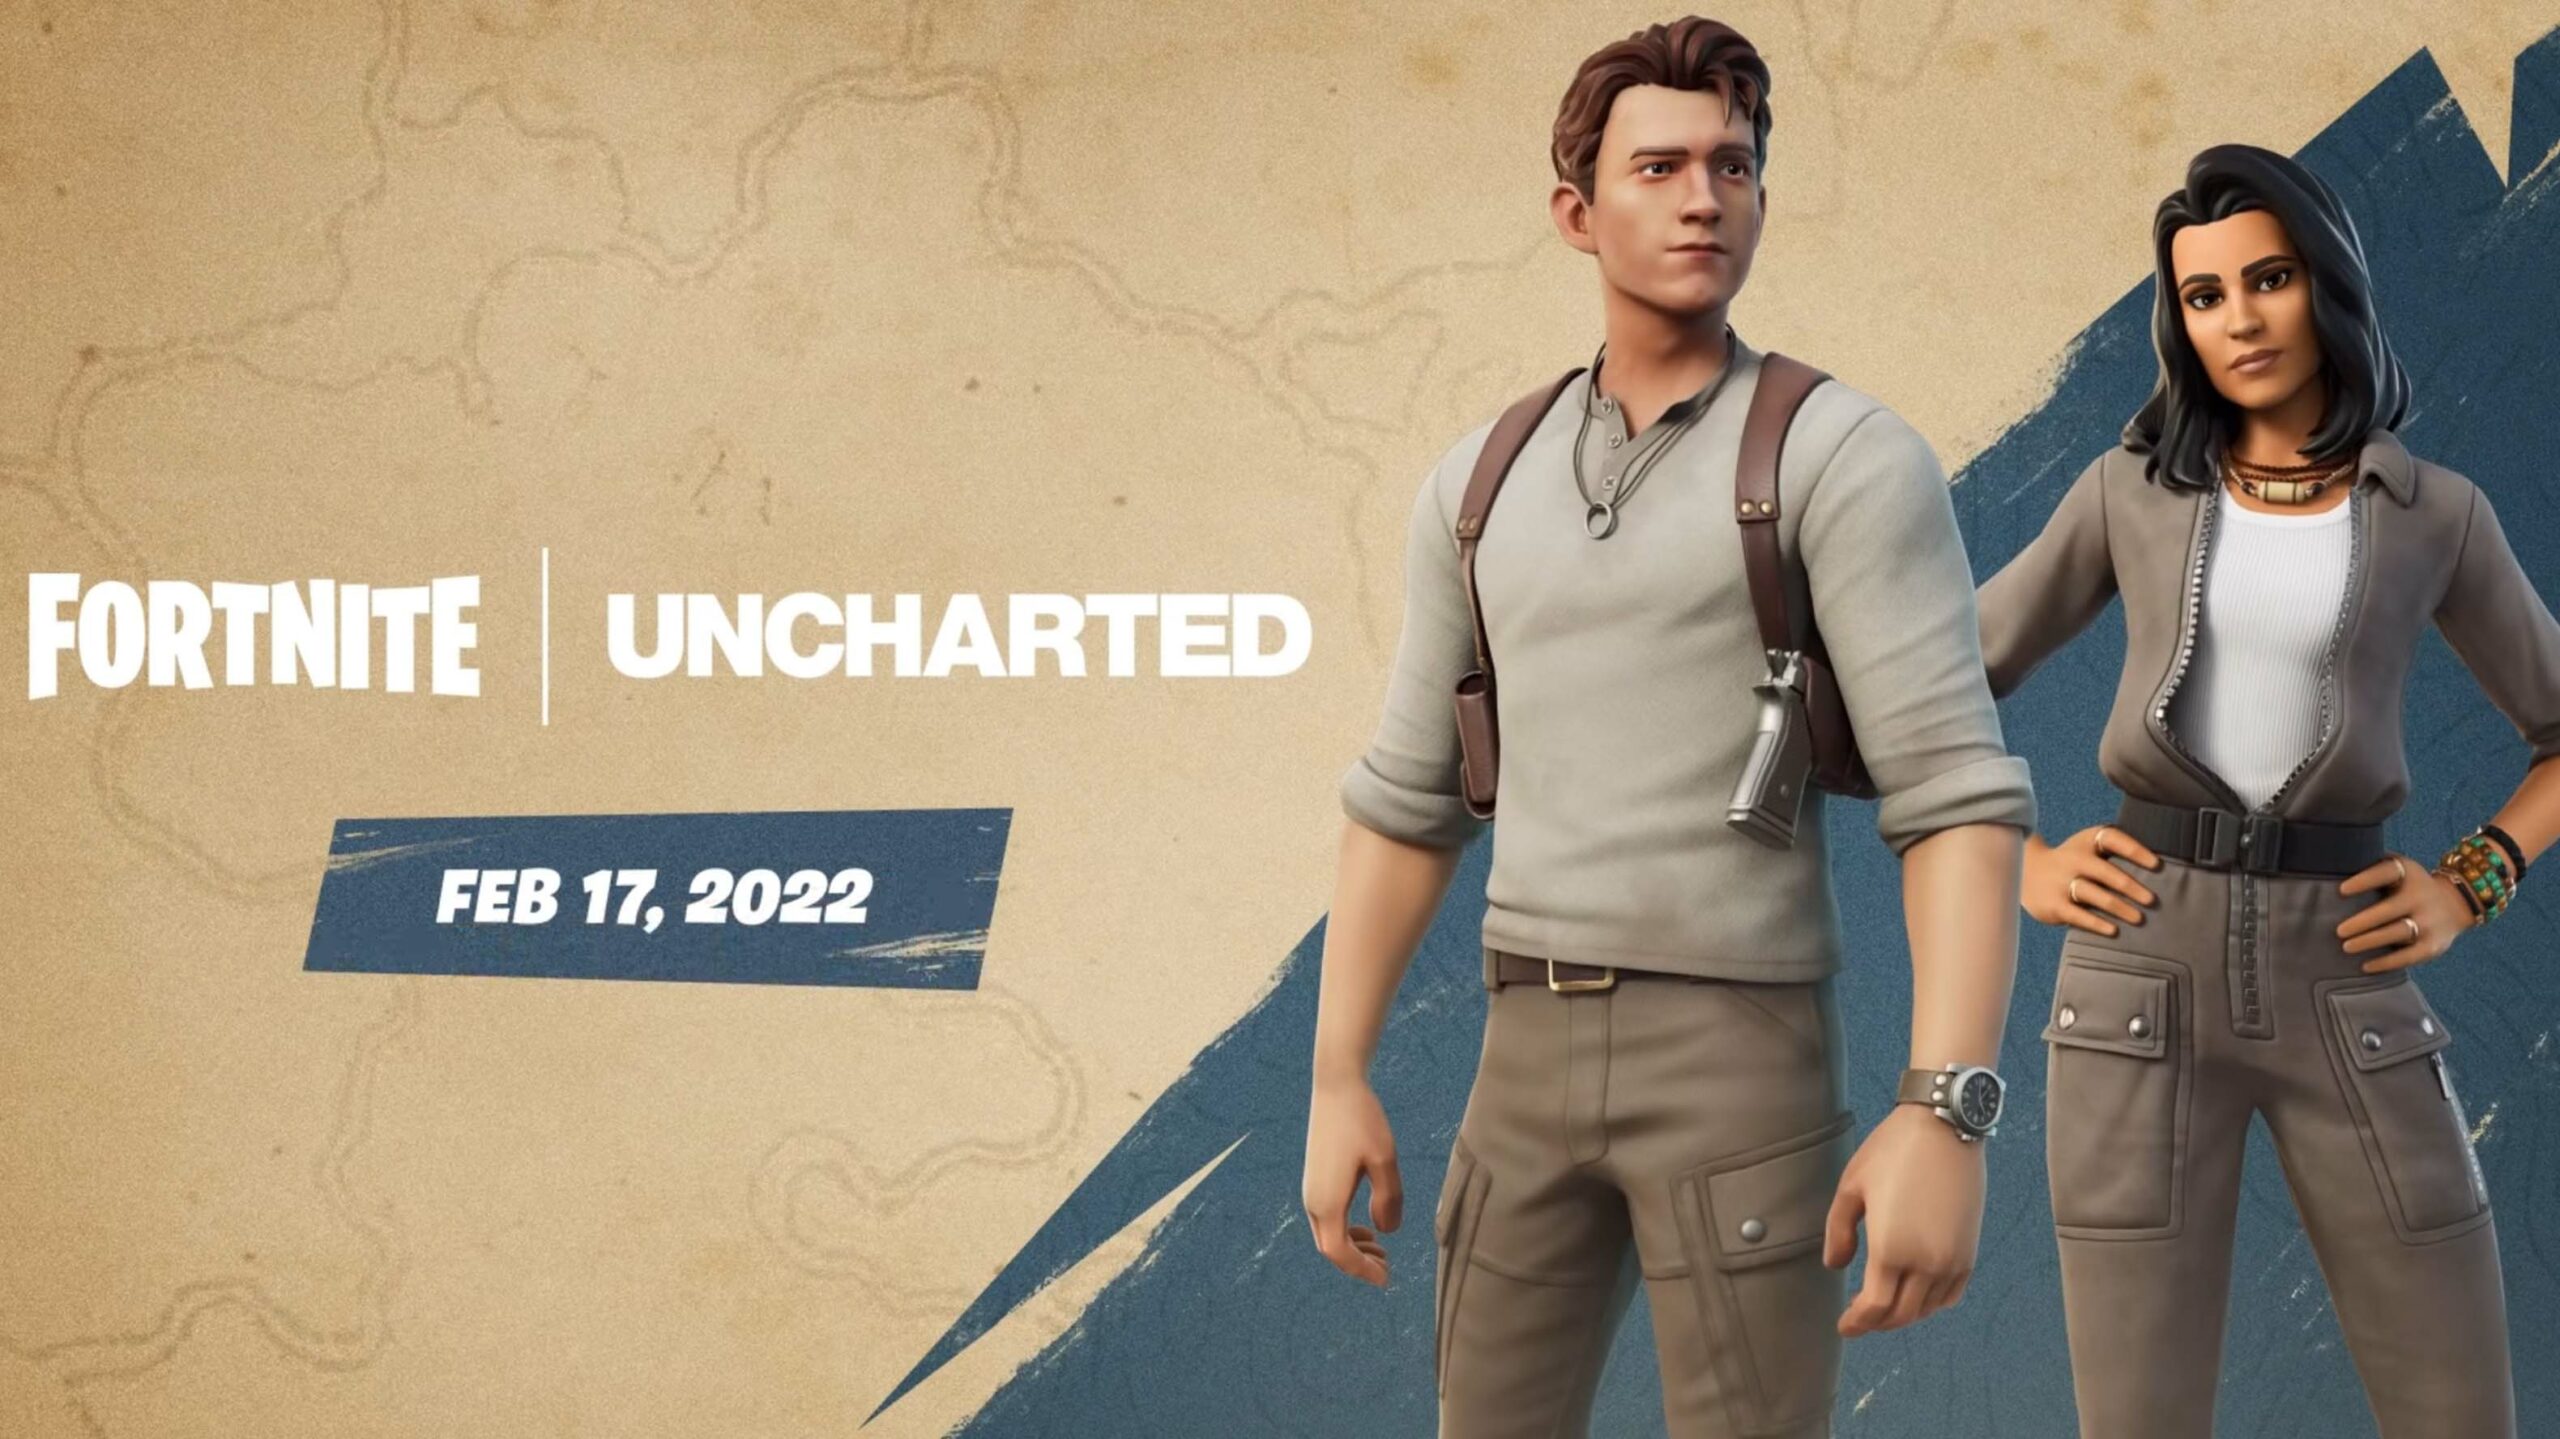 Tom Holland's Nathan Drake Casting Praised By Uncharted Game Director